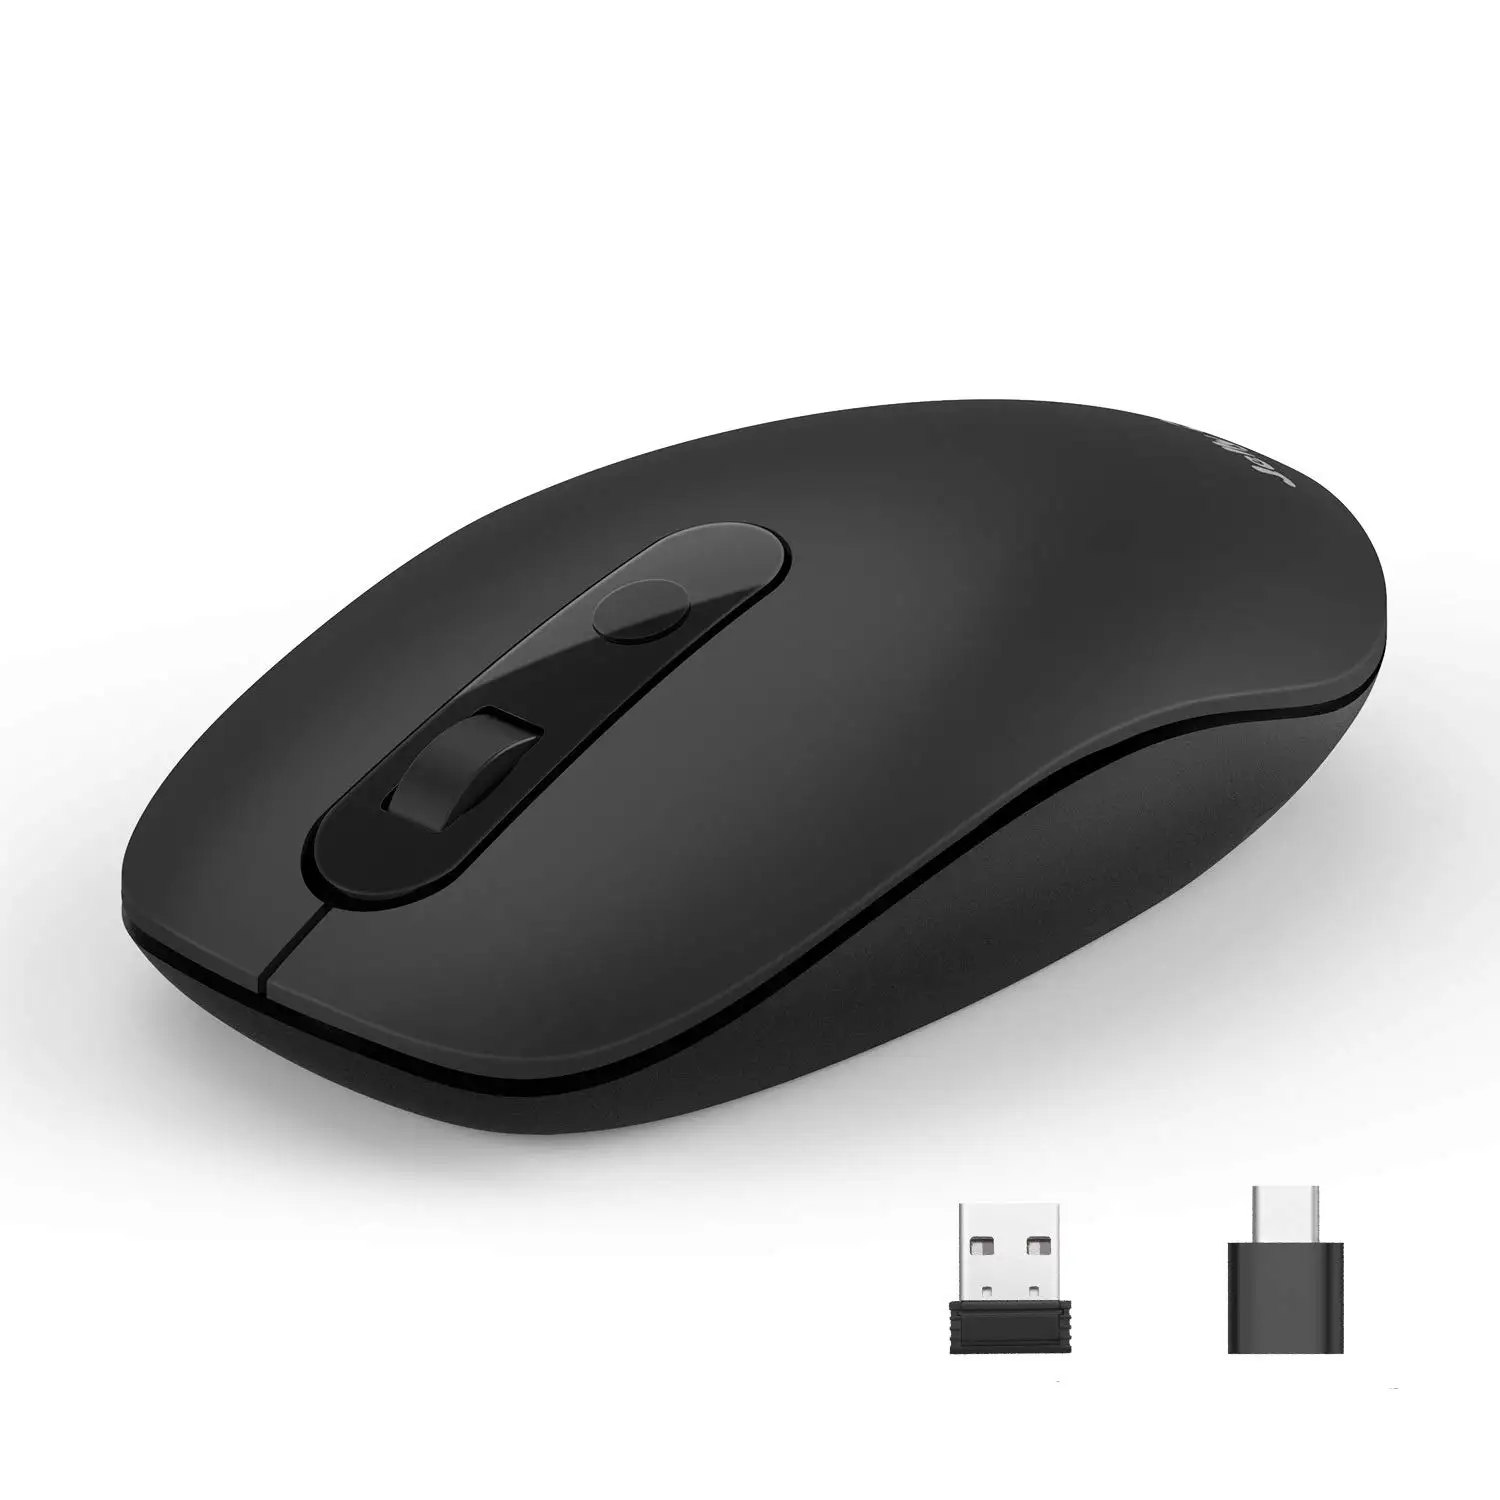 Prøv det Adgang notifikation Mouse Mice With Usb And Type C For Notebook Computer Pc Laptop Computer  Macbook And All Type-c Device 2.4g Wireless Mouse - Buy Mouse Mice,2.4g  Wireless Mouse,Laptop Product on Alibaba.com